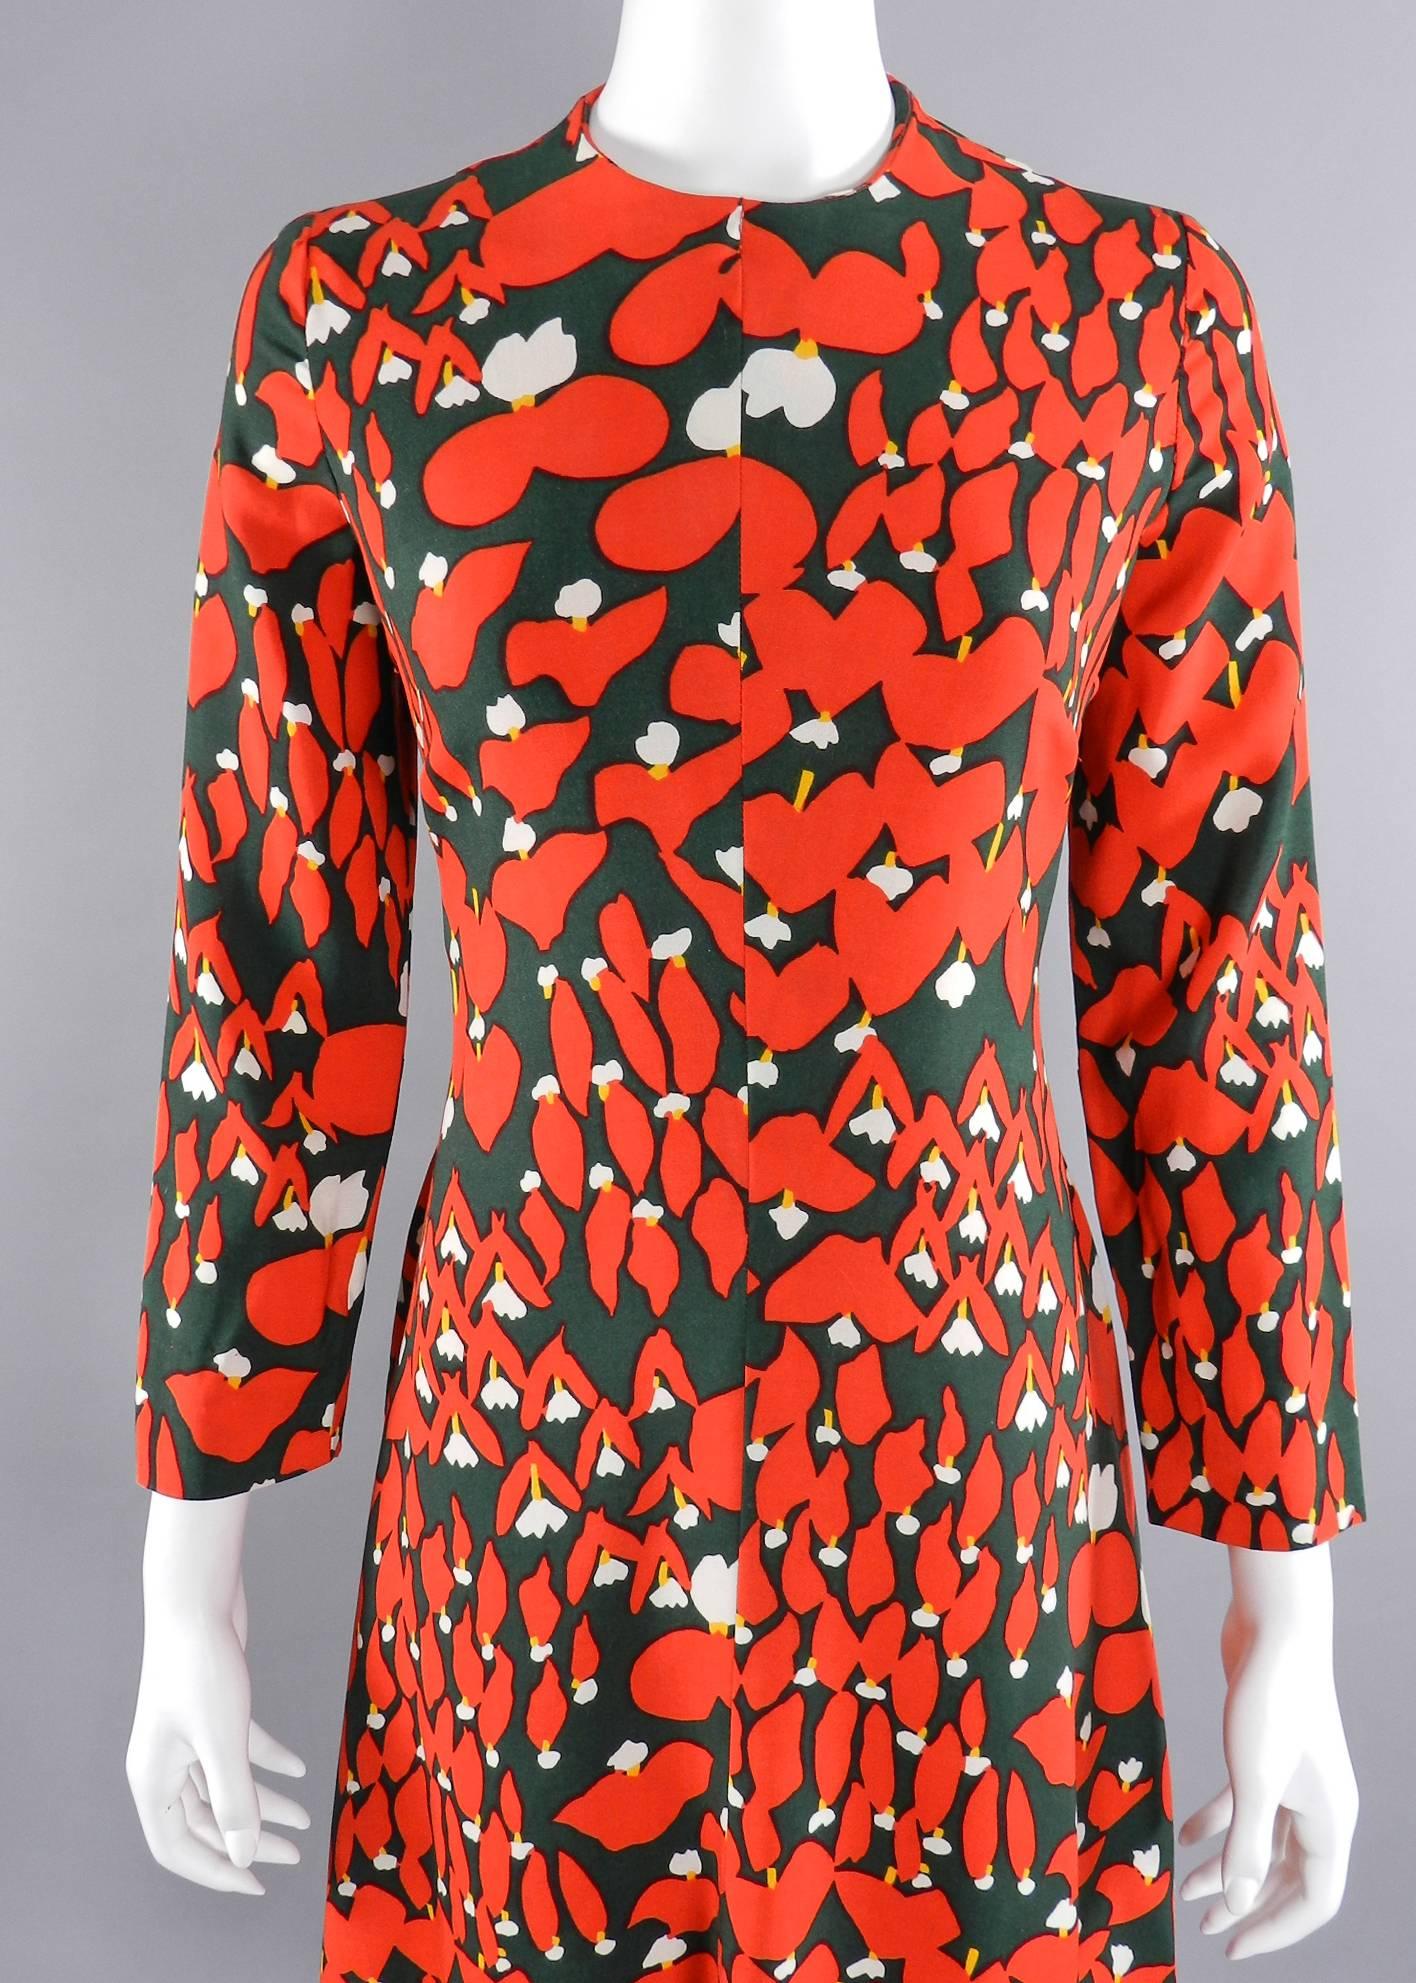 Vintage 1970's Geoffrey Beene dress. Abstract floral pattern in dark green, tomato red, and white. Fully lined. Fabric feels like a cotton / wool blend. Approximate size USA 6. To fit 34